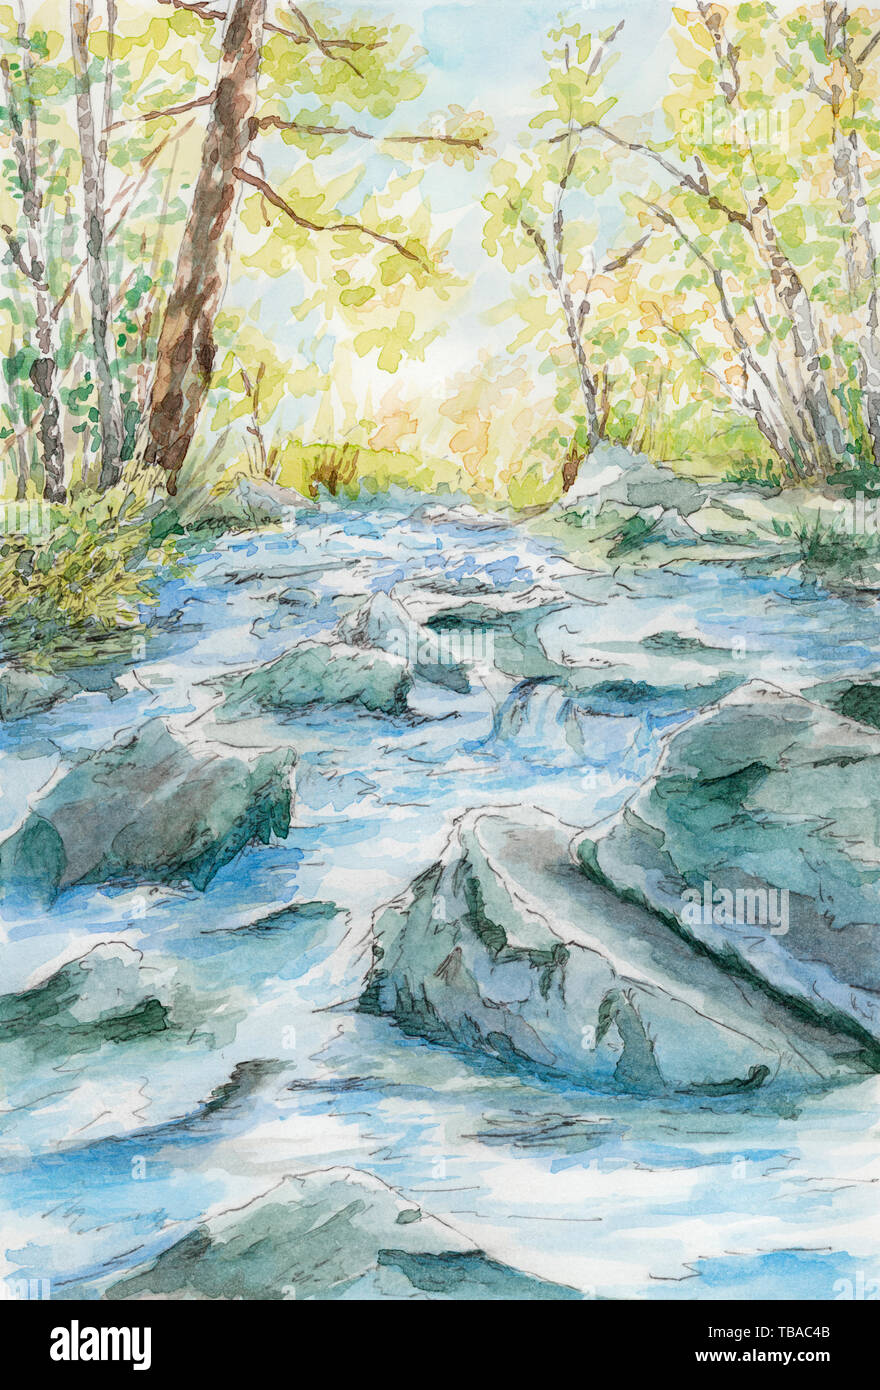 Stony river flow between trees. Watercolor on paper. Stock Photo